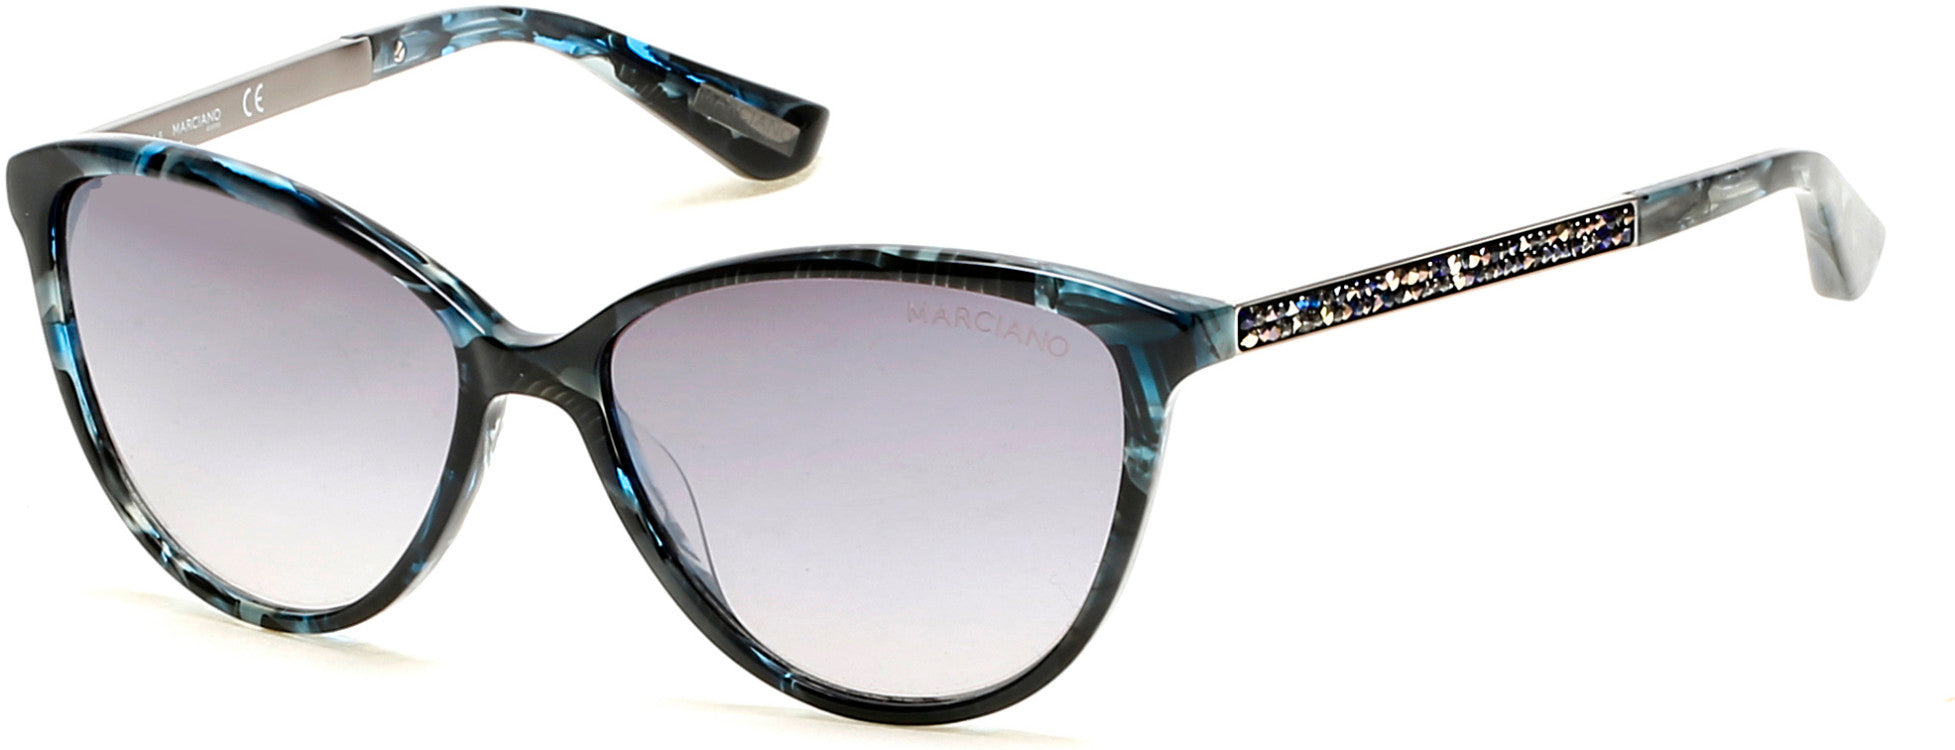 Guess By Marciano GM0755 Cat Sunglasses 90C-90C - Blue Multi/ Smoke Gradient With Light Flash Lens